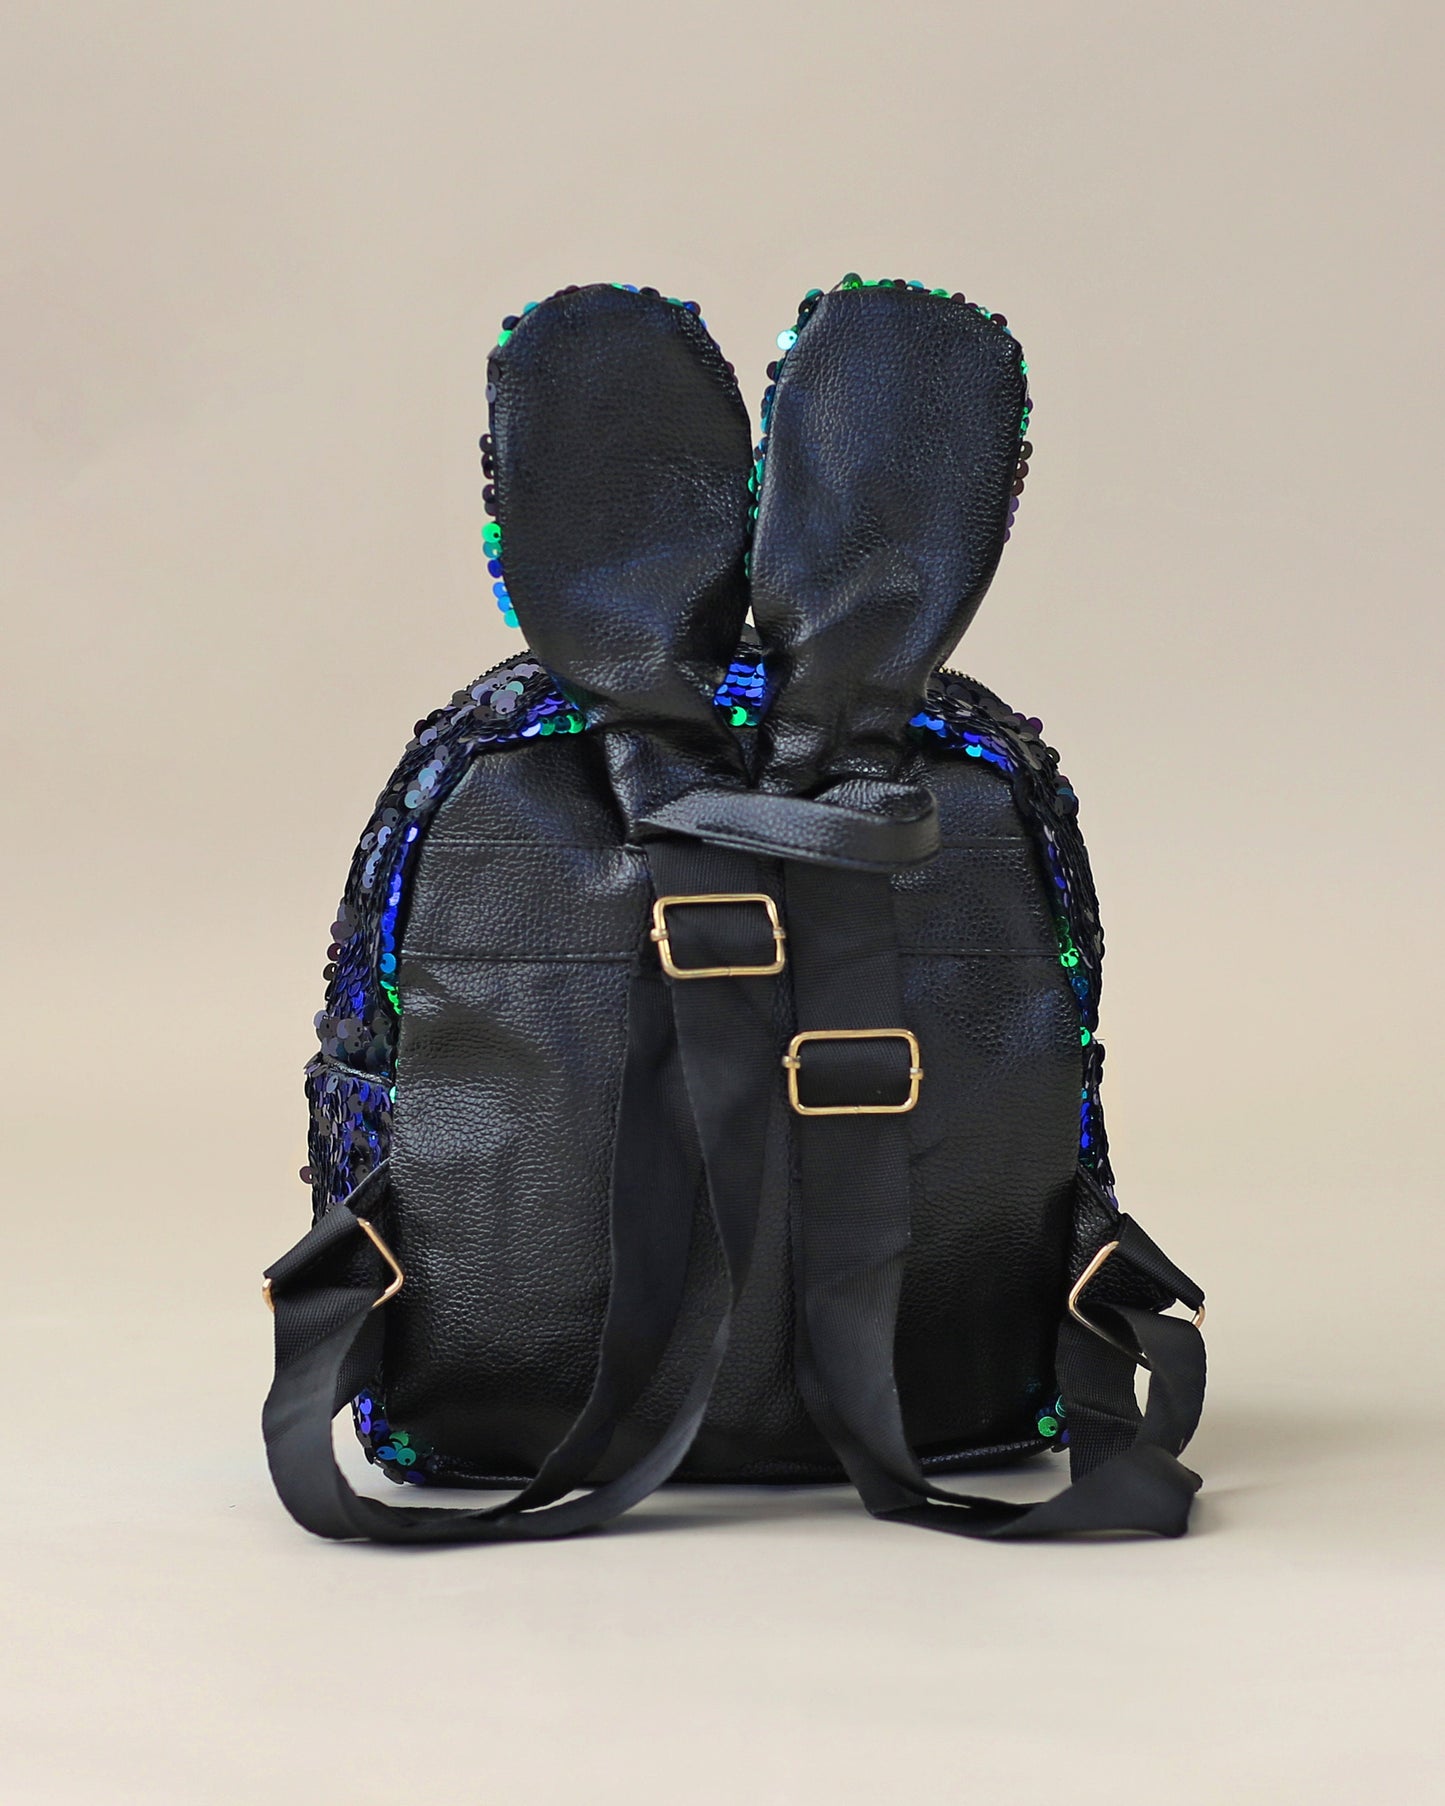 Green and Blue Bunny Backpack - Bunny Backpack - Bunny Bag - Reversible Sequin Backpack - Sequin Backpack - Sequin Bag